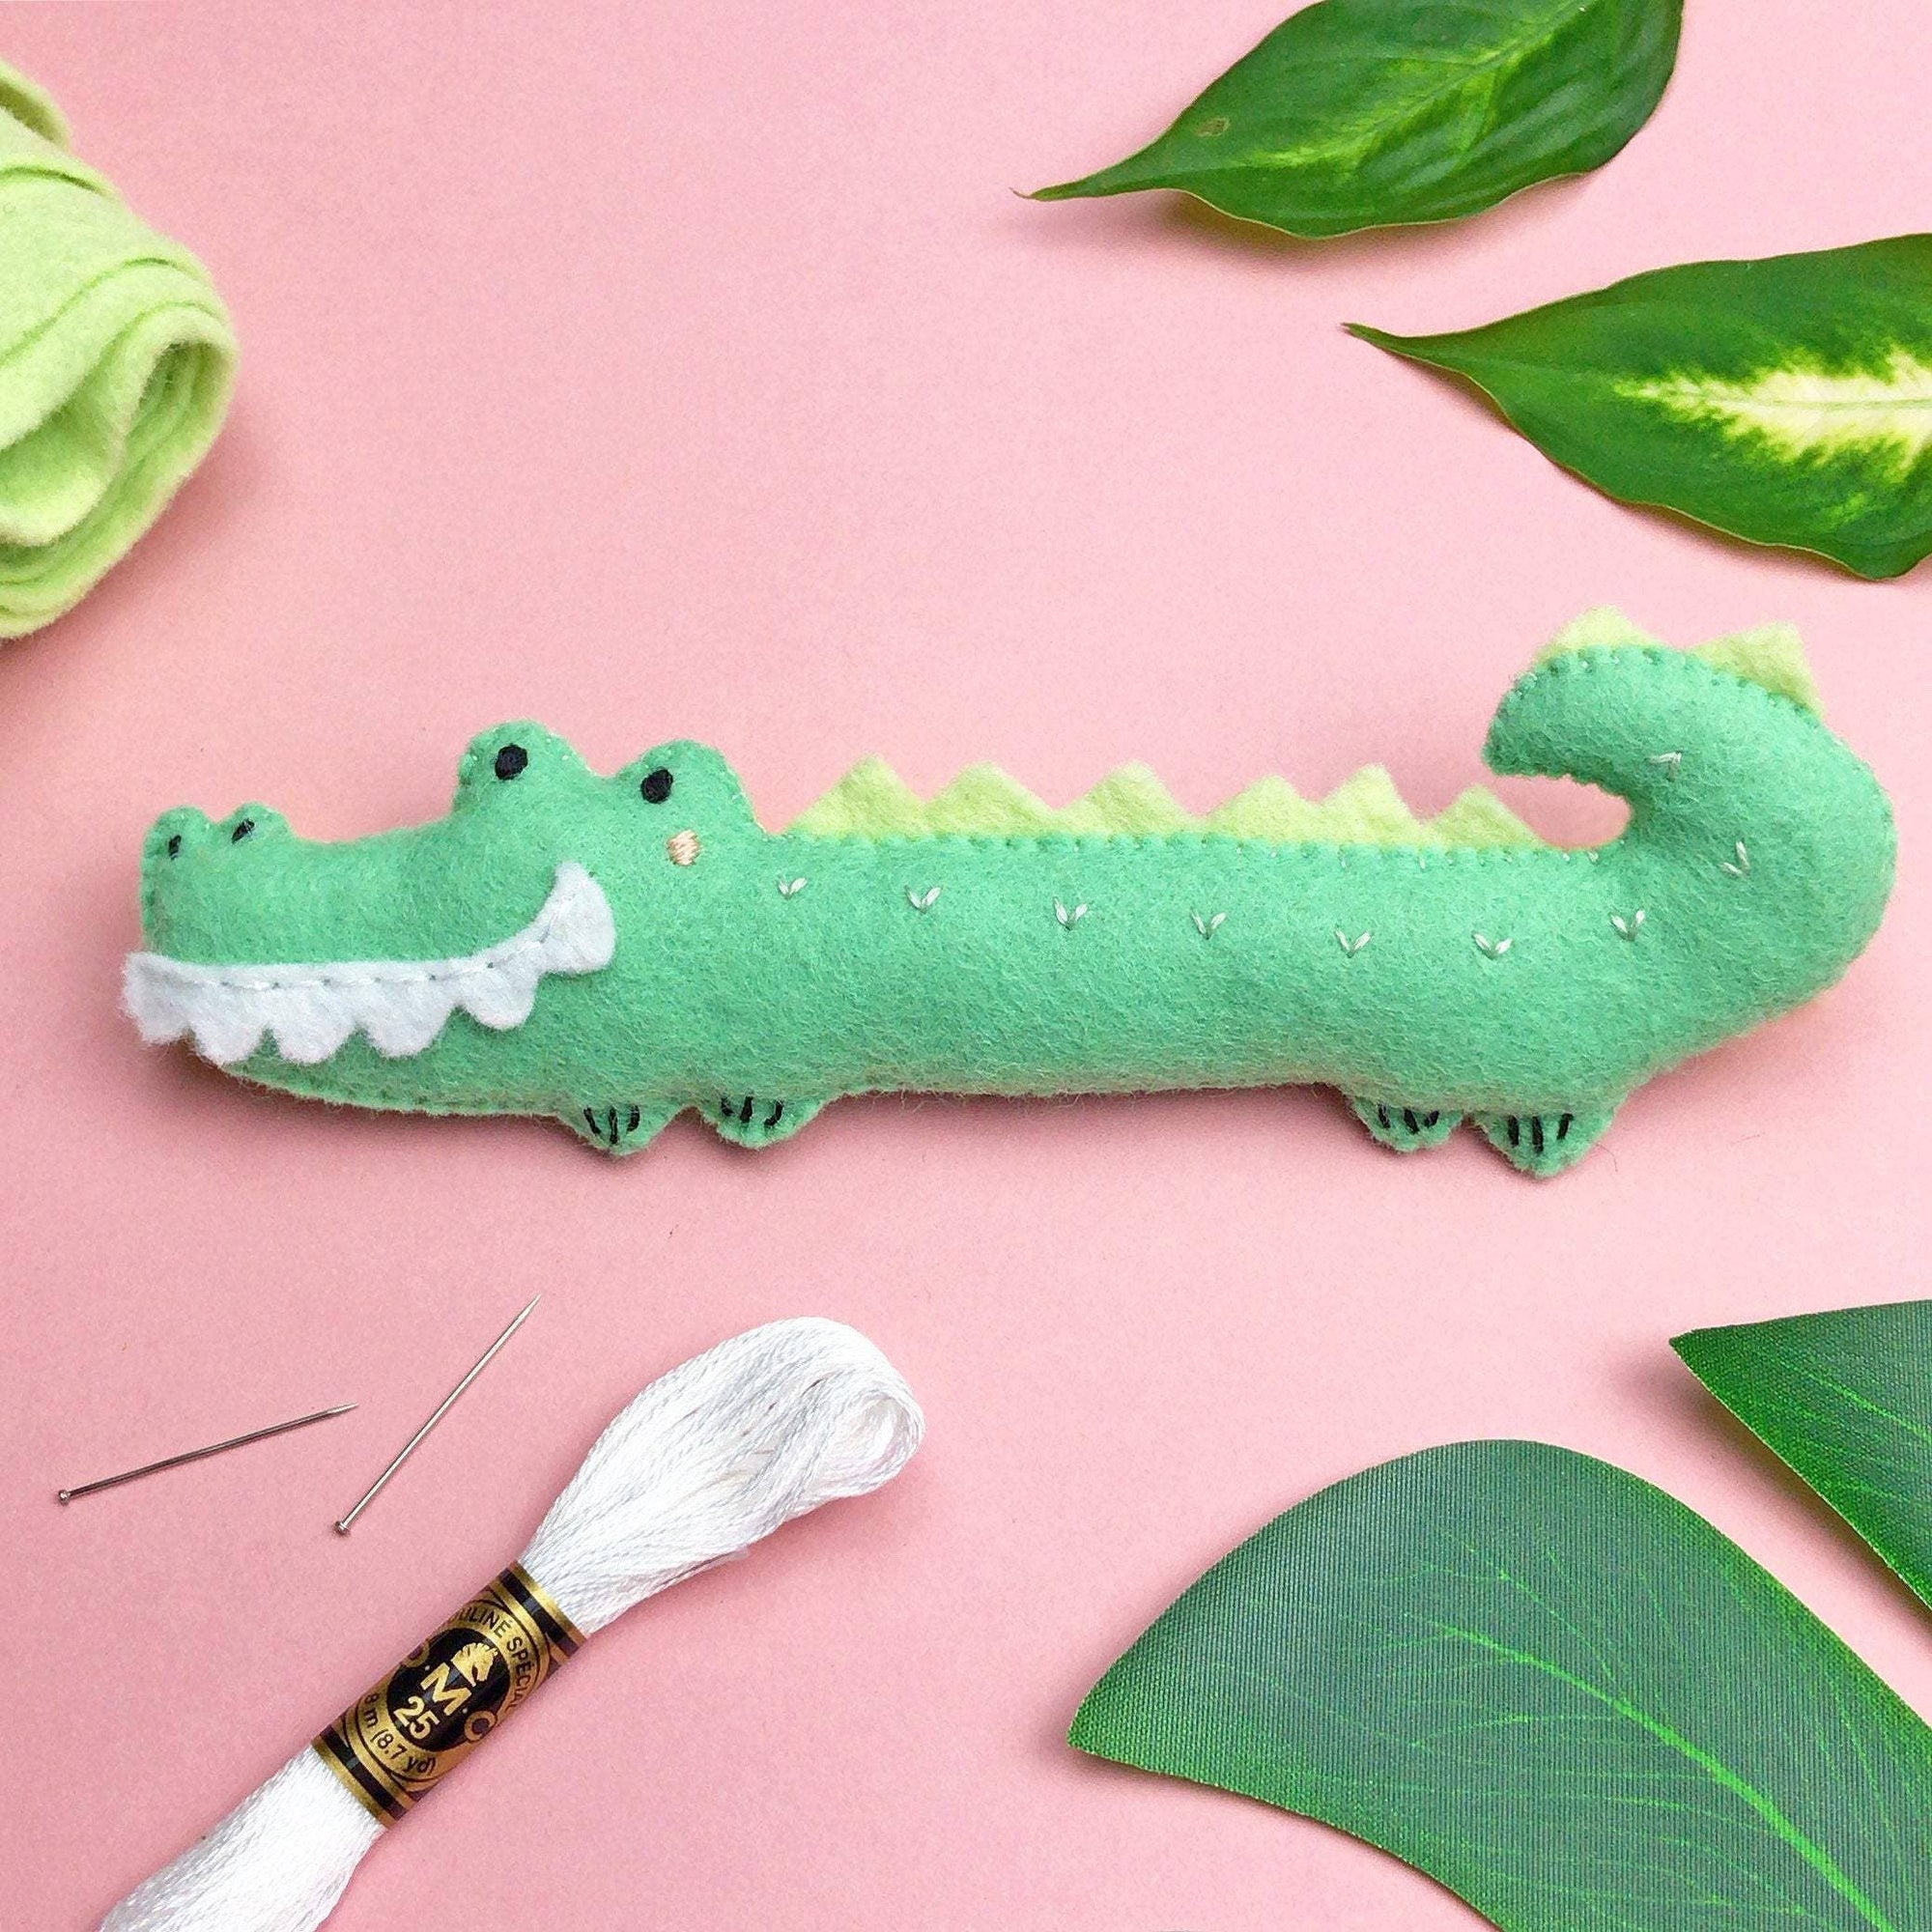 Fun With Felt - Everything You Need To Know About This Popular